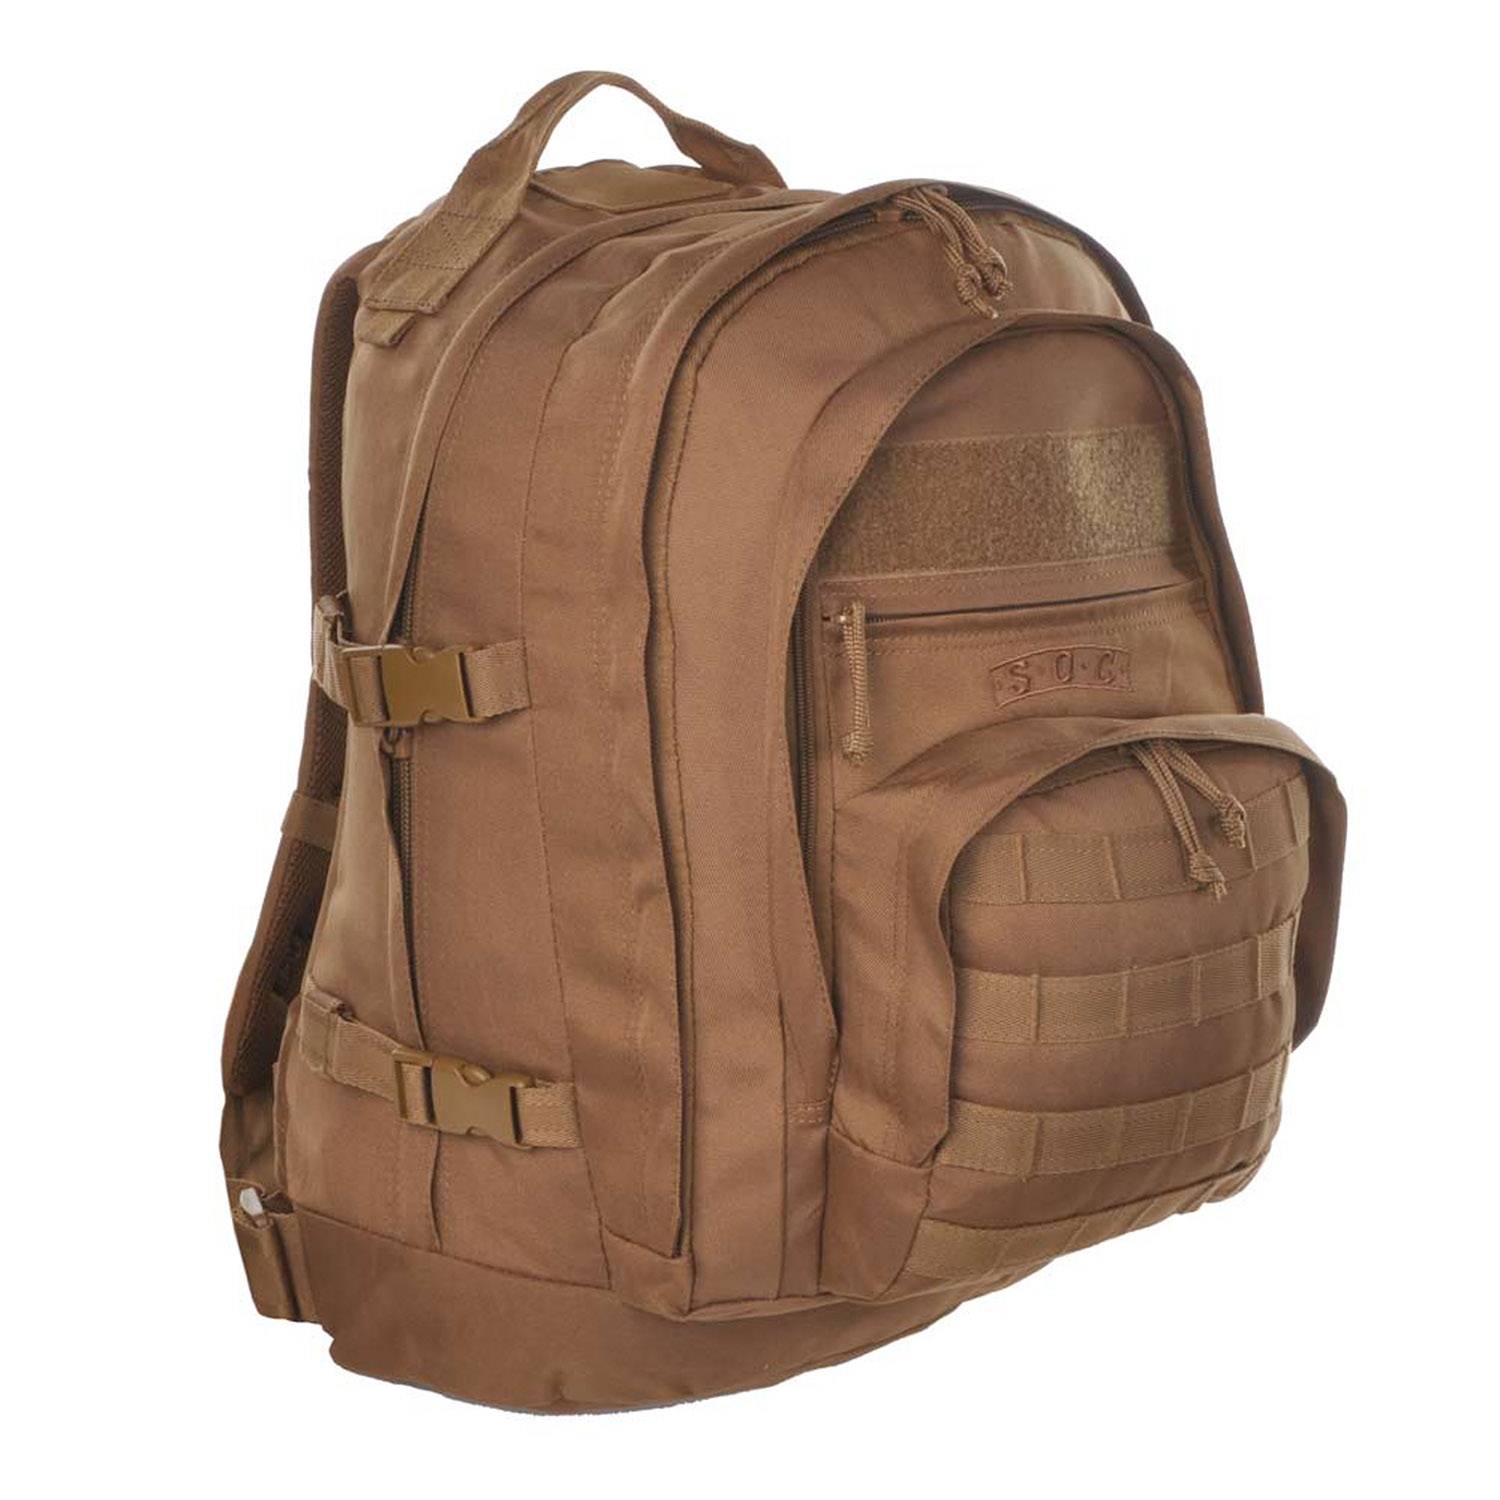 Sandpiper Three-Day Pass Backpack in Coyote